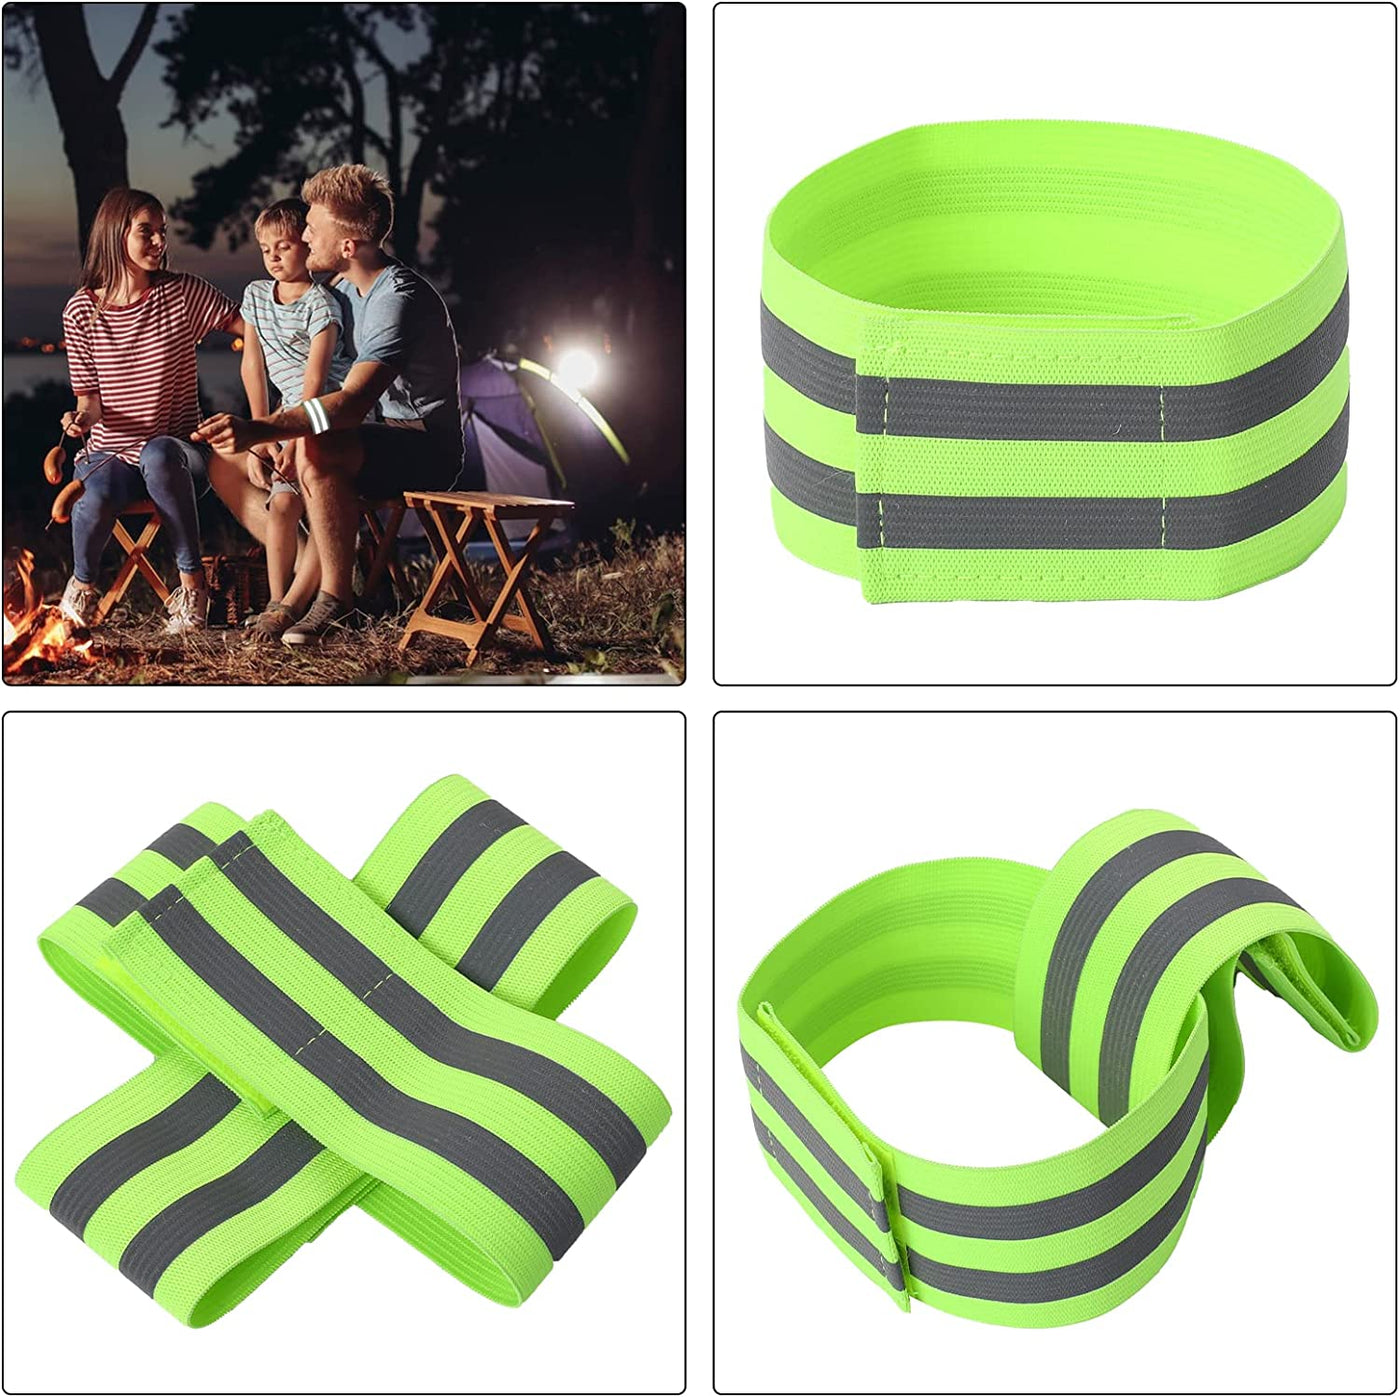 High Visibility Reflective Bands for Wrist Arm Ankle Leg, 4 Pack Adjustable Elastic Reflective Gear for Night Walking Cycling Running Jogging Outdoor Safety Reflector Straps Belt Vest Wristbands